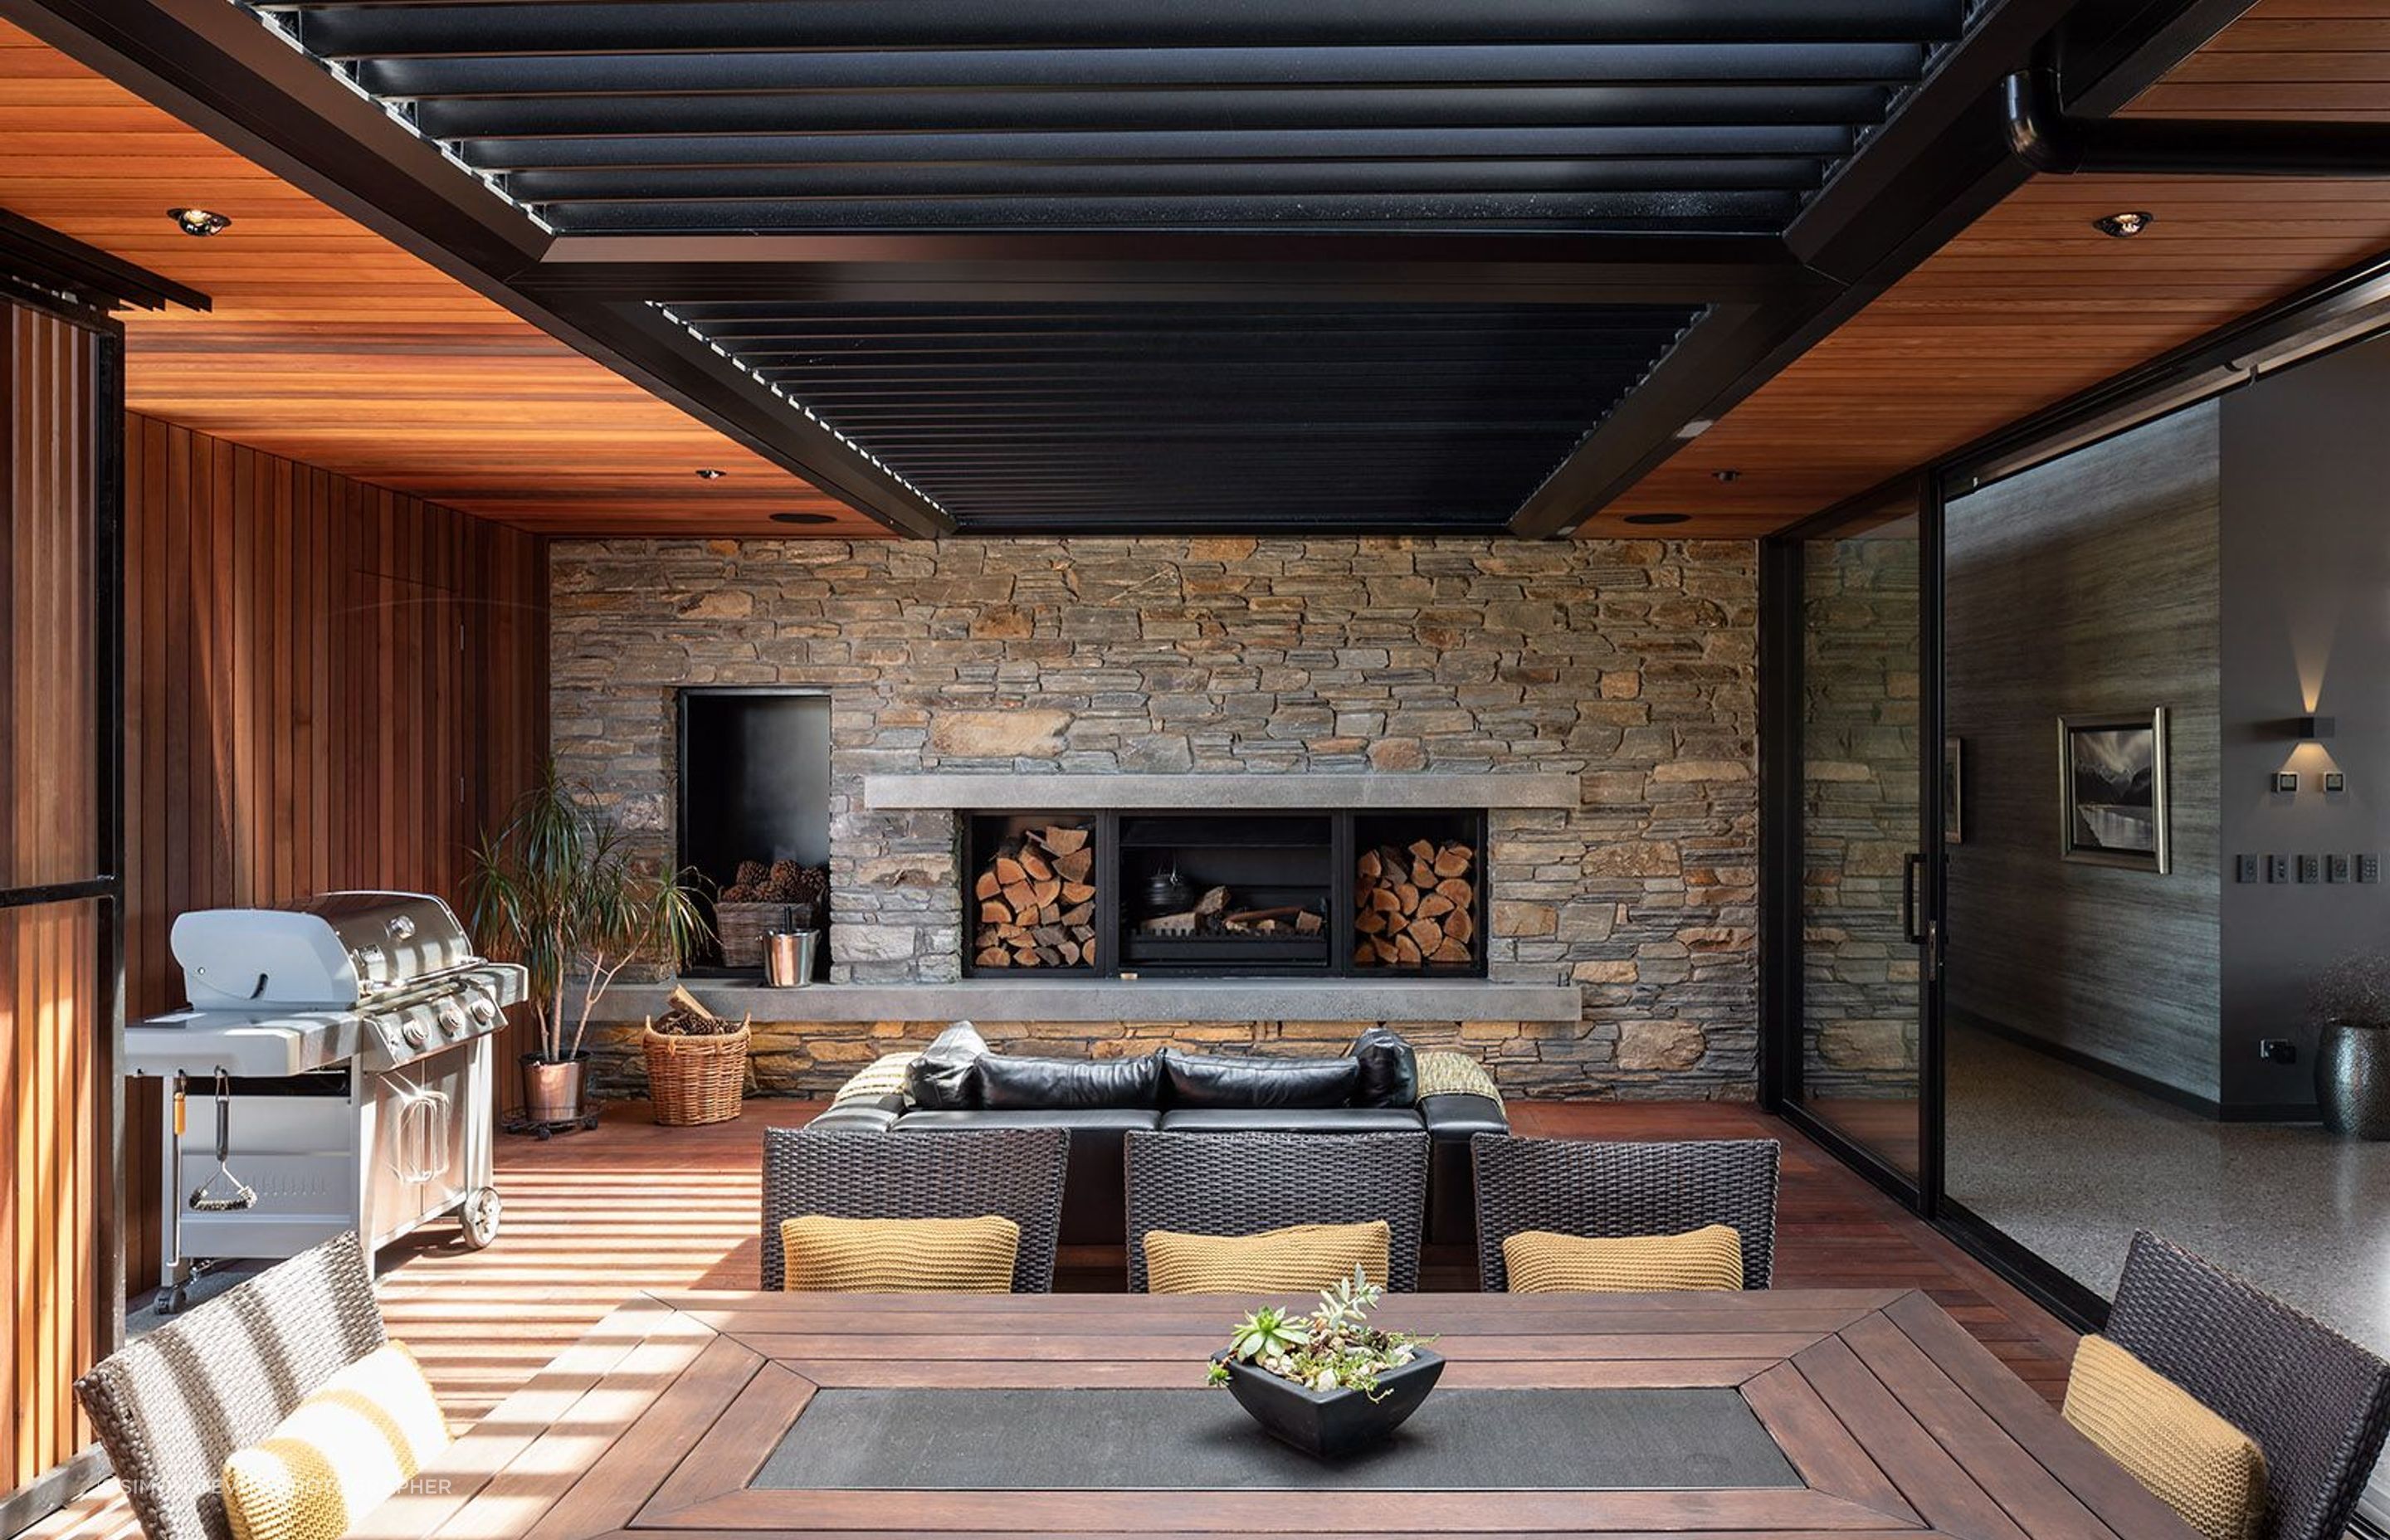 The courtyard at the back of the living spaces features moveable cedar screens that filter light into the cosy space.